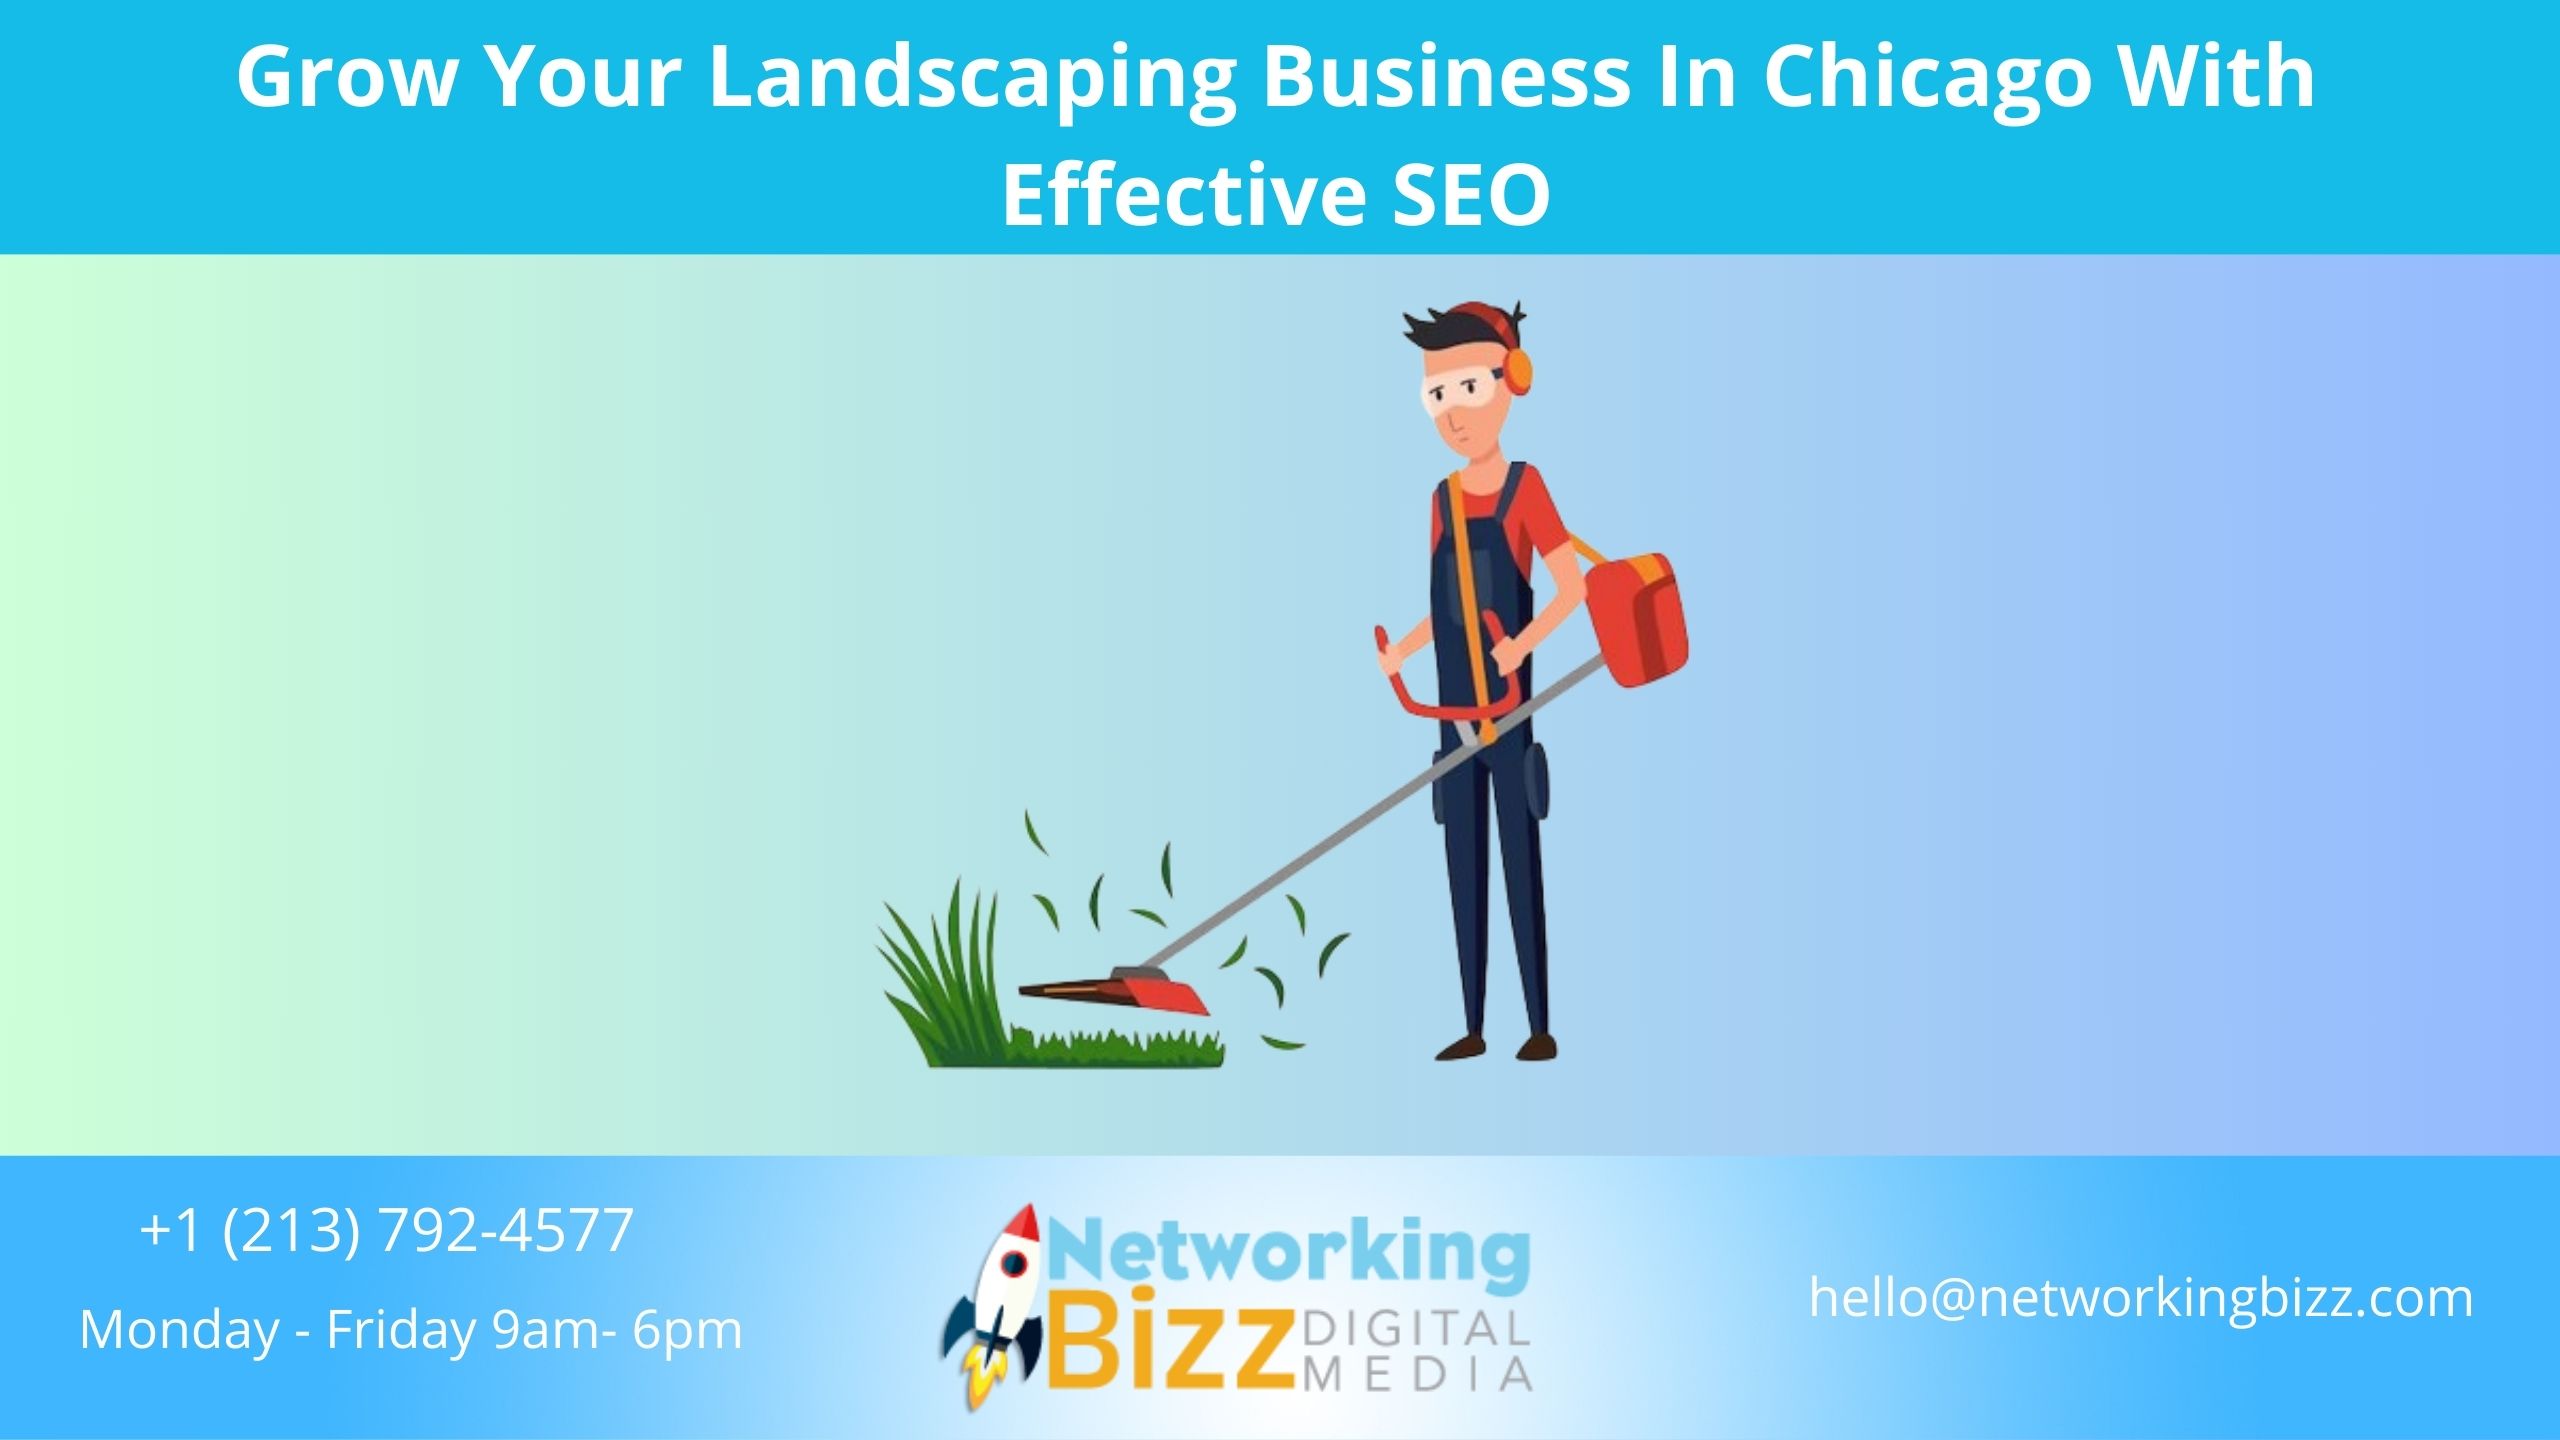 Grow Your Landscaping Business In Chicago With Effective SEO